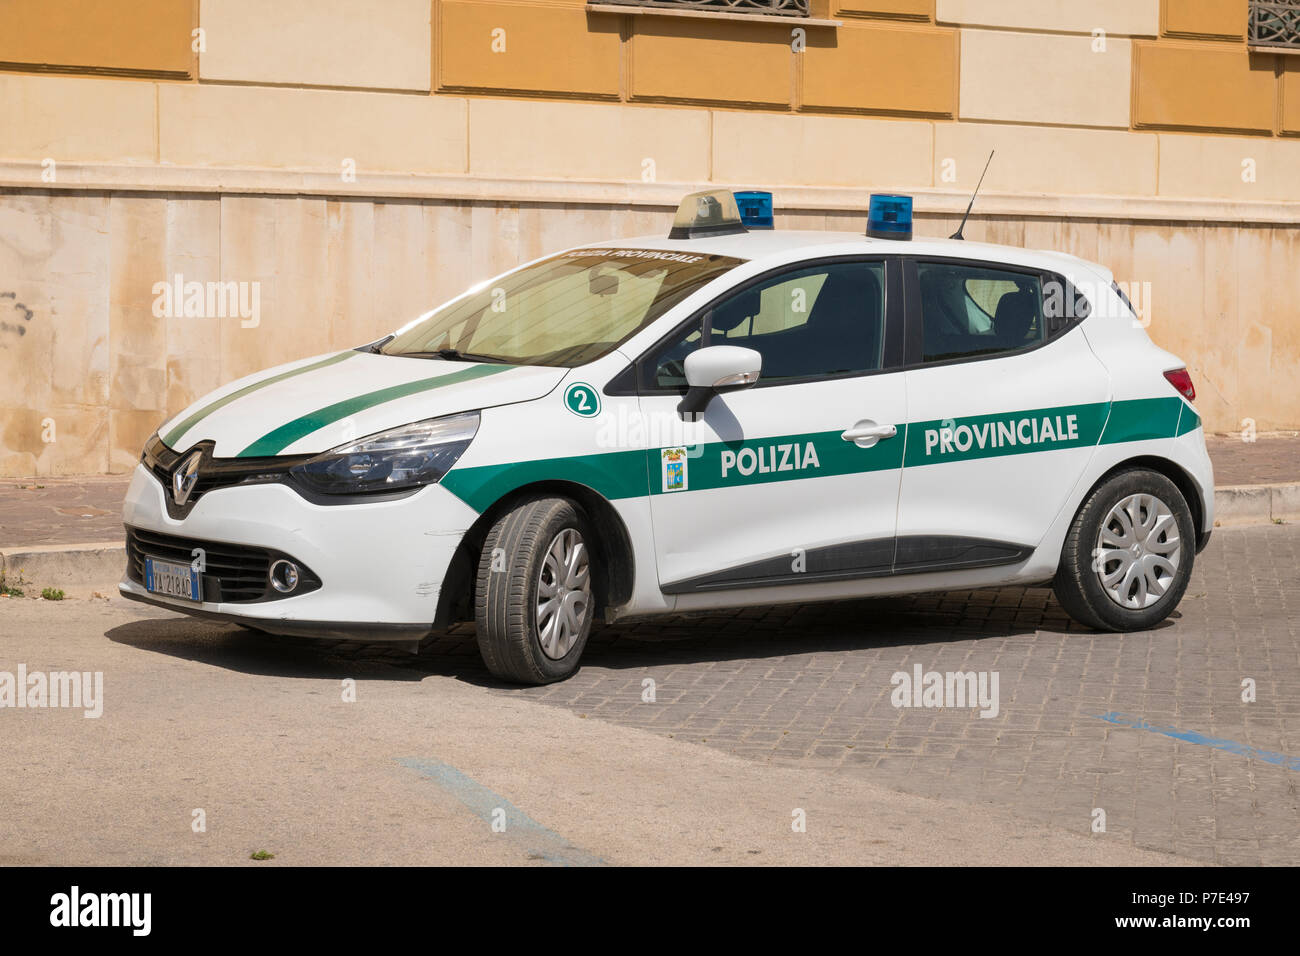 Italy Sicily Agrigento modern police car white green stripe Polizia Provinciale Renault Clio blue lights parked cobble cobbled street road Stock Photo